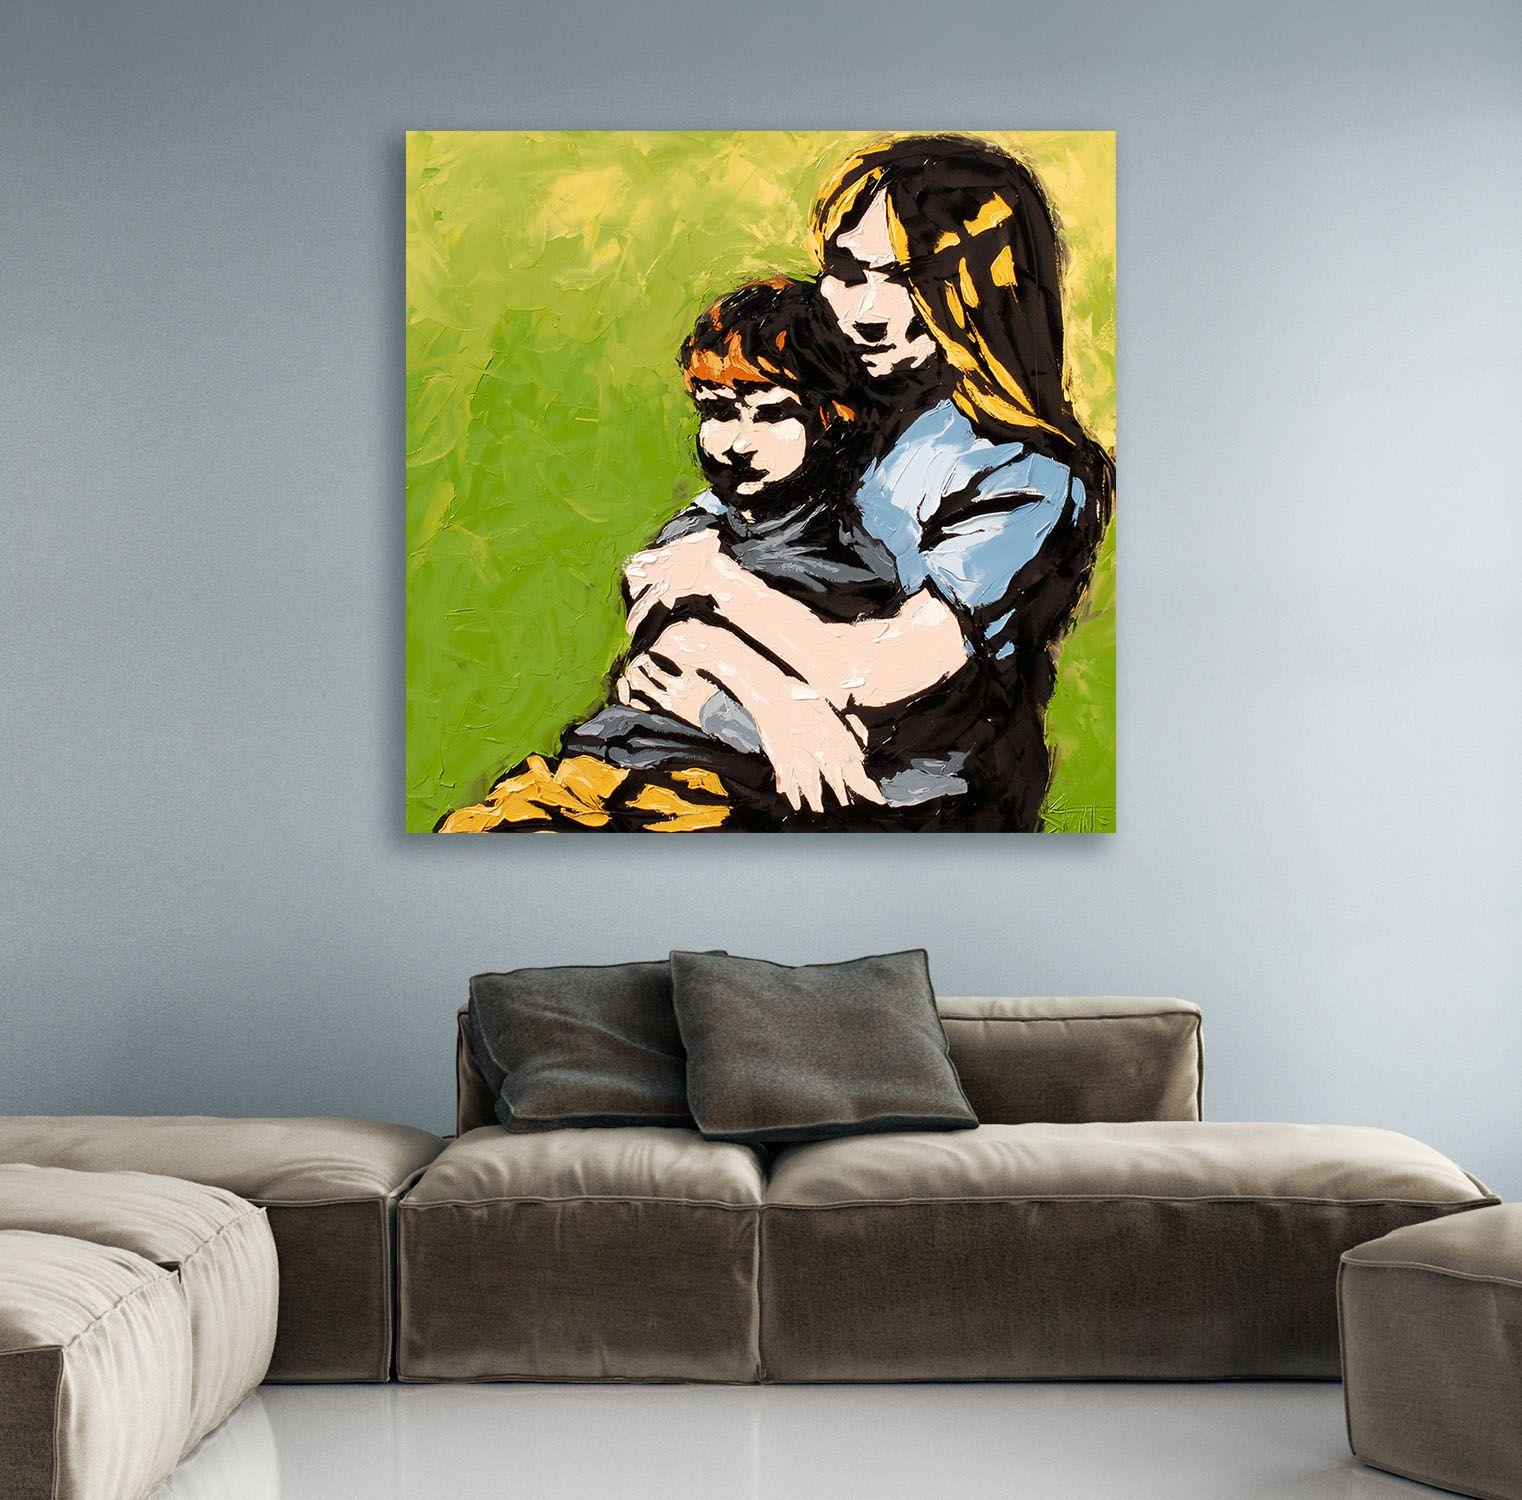 Brother and sister, together as friends, ready to face whatever life sends. - Robert Brault :: Painting :: Expressionism :: This piece comes with an official certificate of authenticity signed by the artist :: Ready to Hang: Yes :: Signed: Yes ::